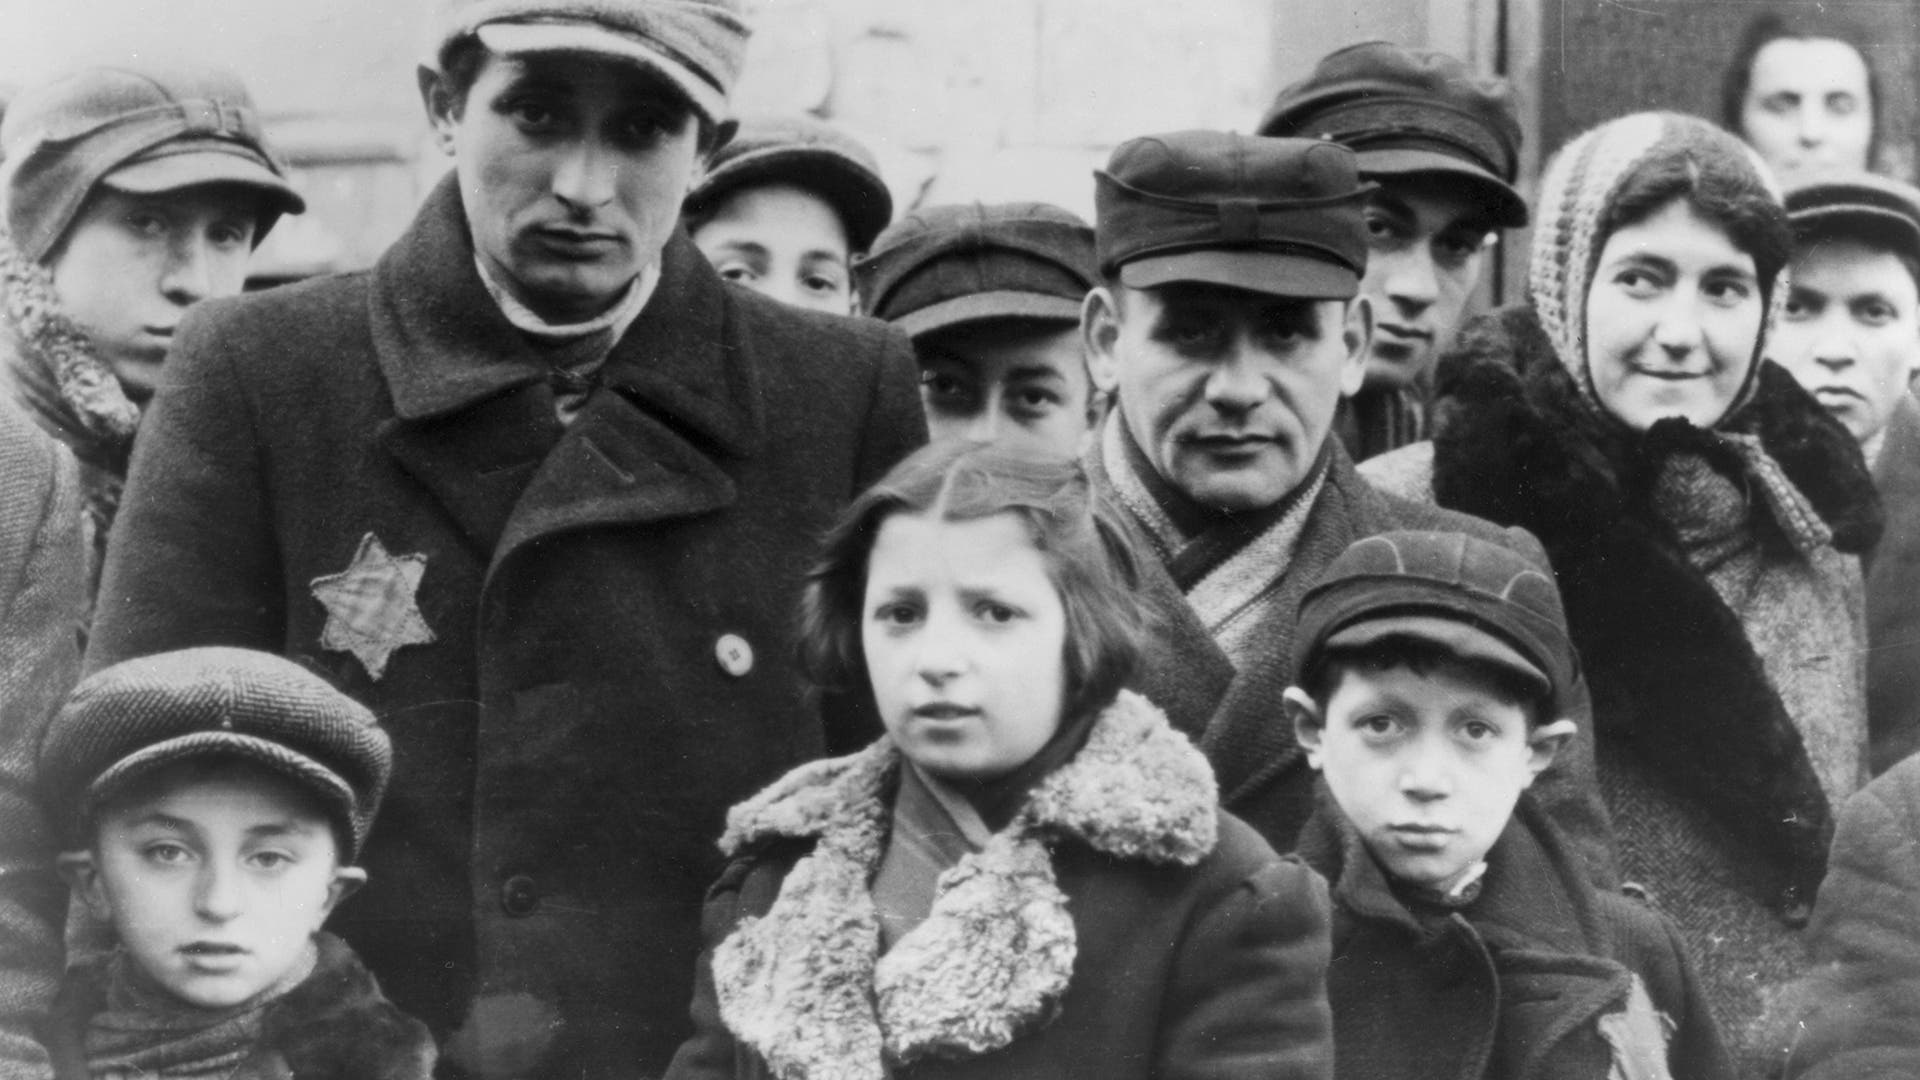 Jews wearing Star of David badges, Lodz Ghetto, Poland, World War II, 1940-1944. The Nazis forced Jews into over-crowded ghettos from which thousands were deported to the death camps.